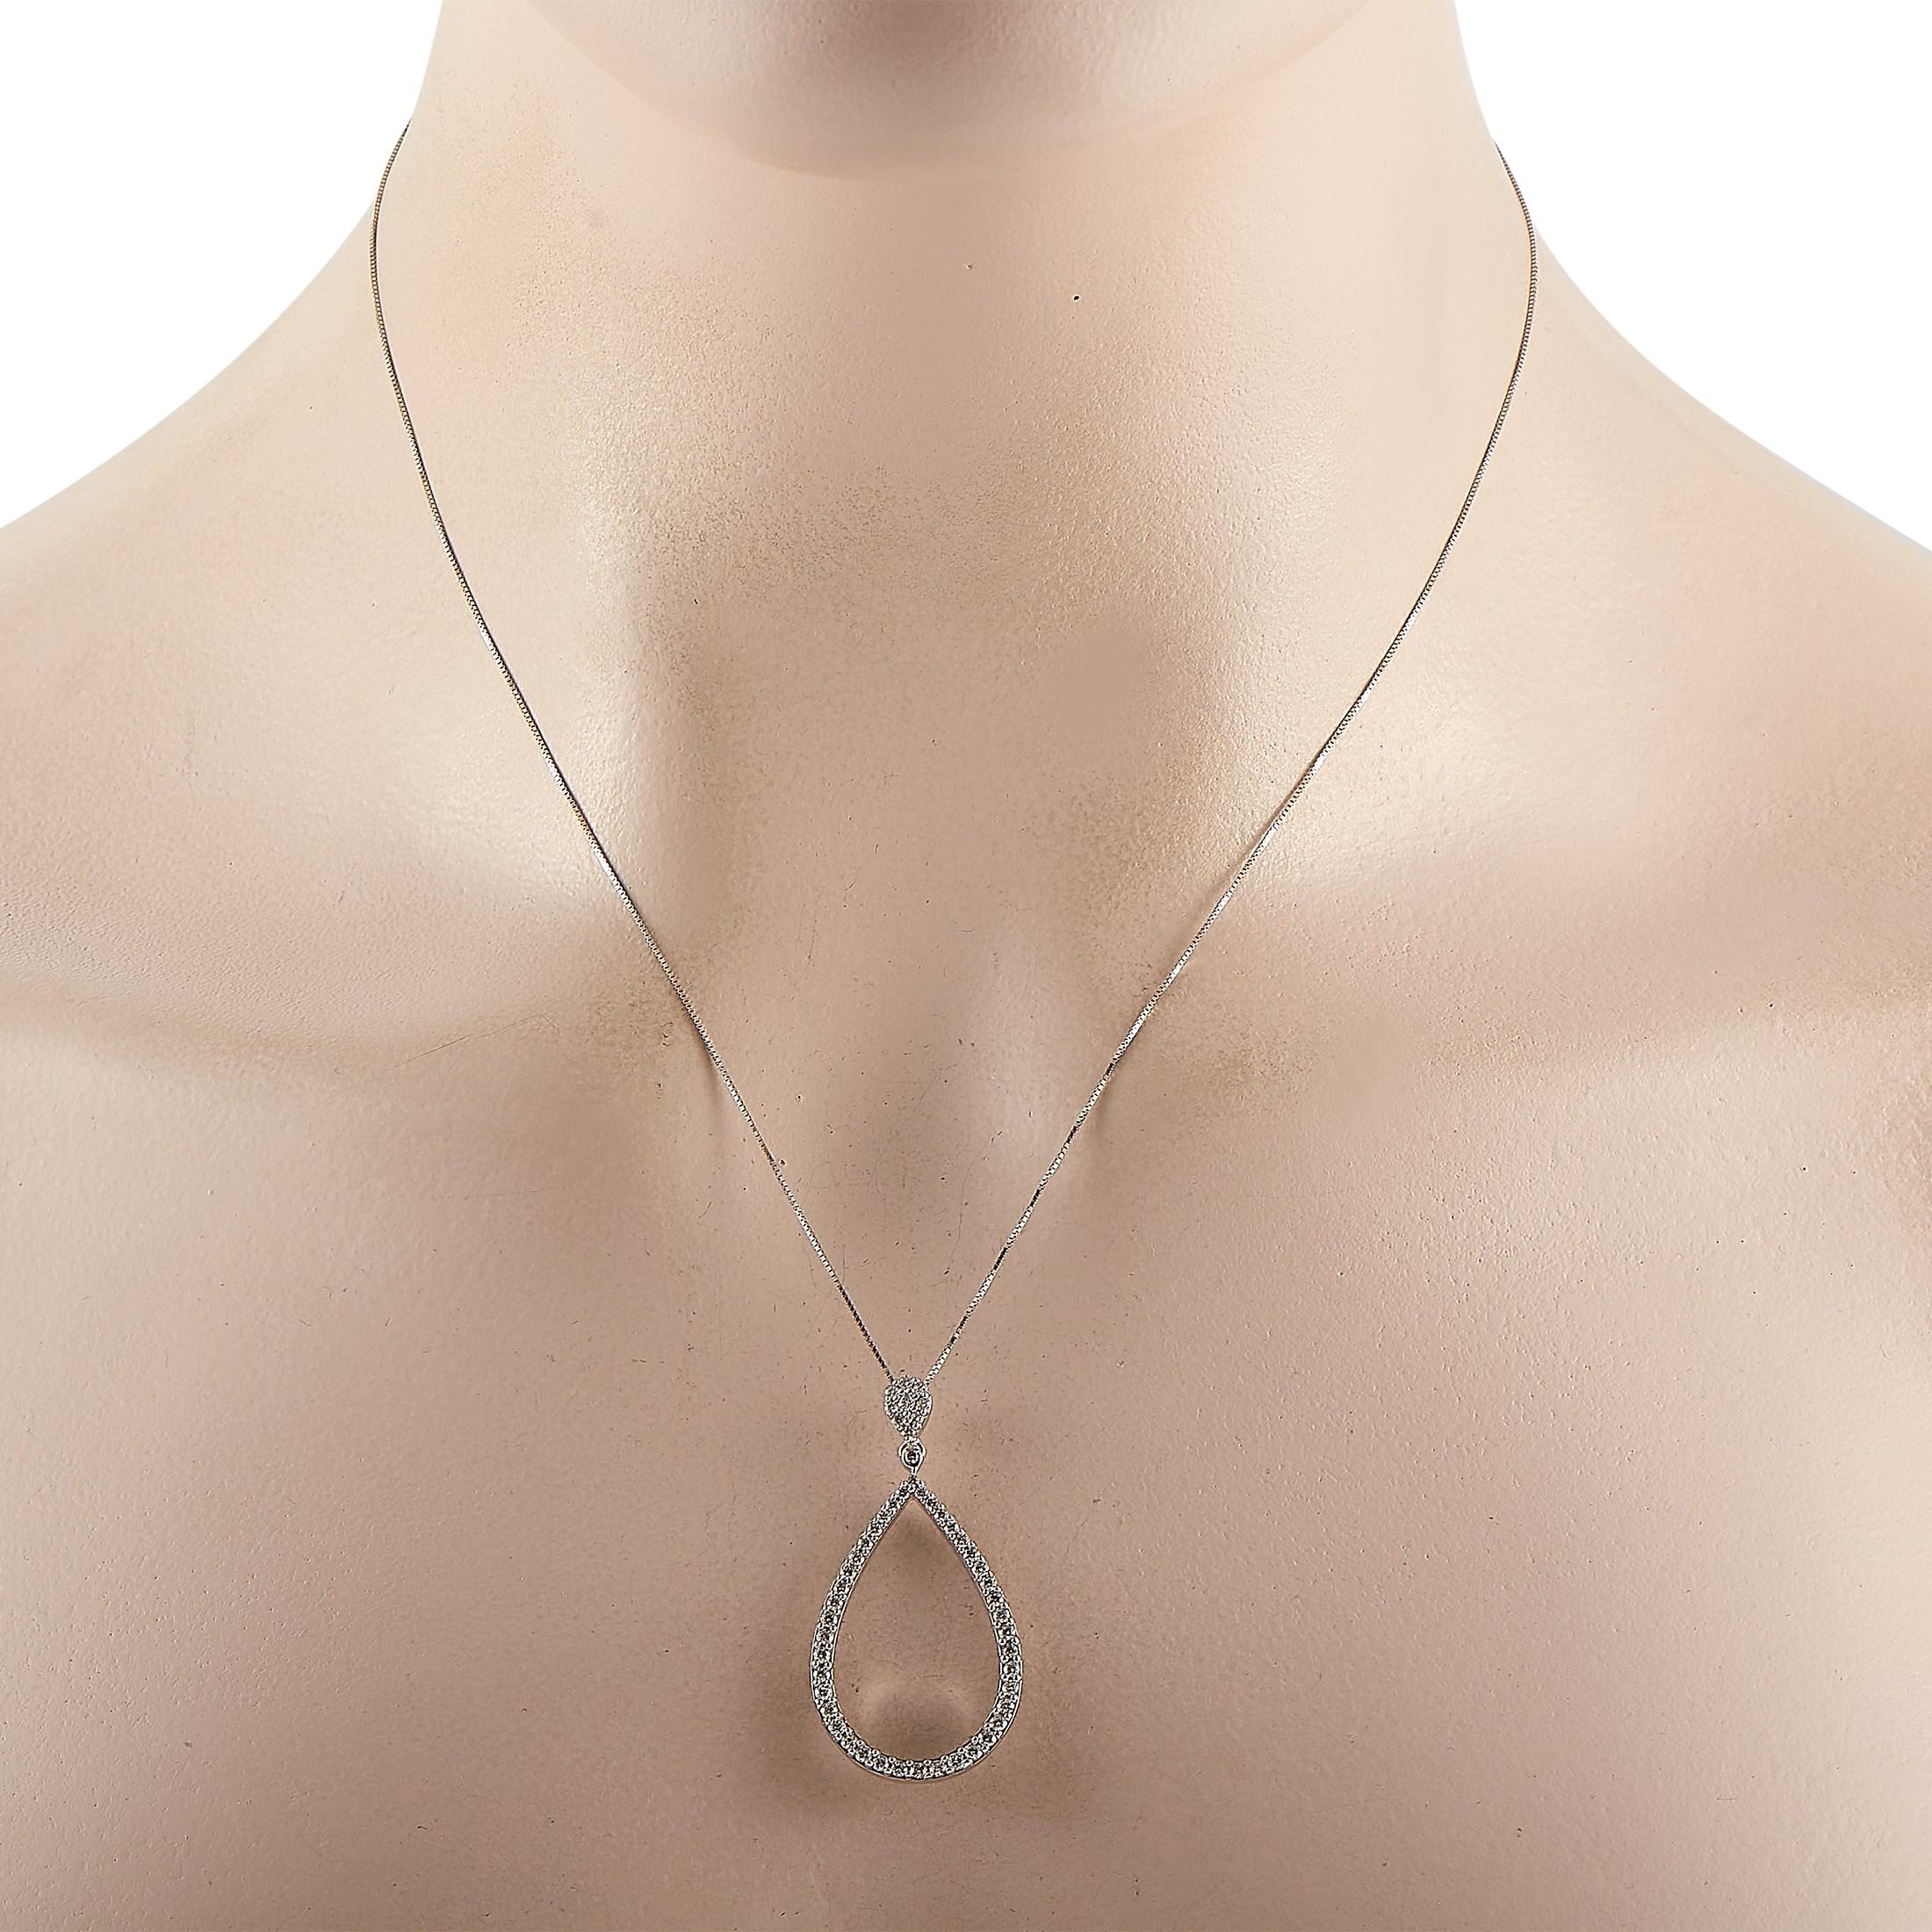 This LB Exclusive 14K White Gold 0.75 ct Diamond Teardrop Pendant Necklace features a delicate 14K White Gold chain measuring 18 inches in length. The necklace features a teardrop-shaped pendant set with 0.75 carats of round-cut diamonds. The